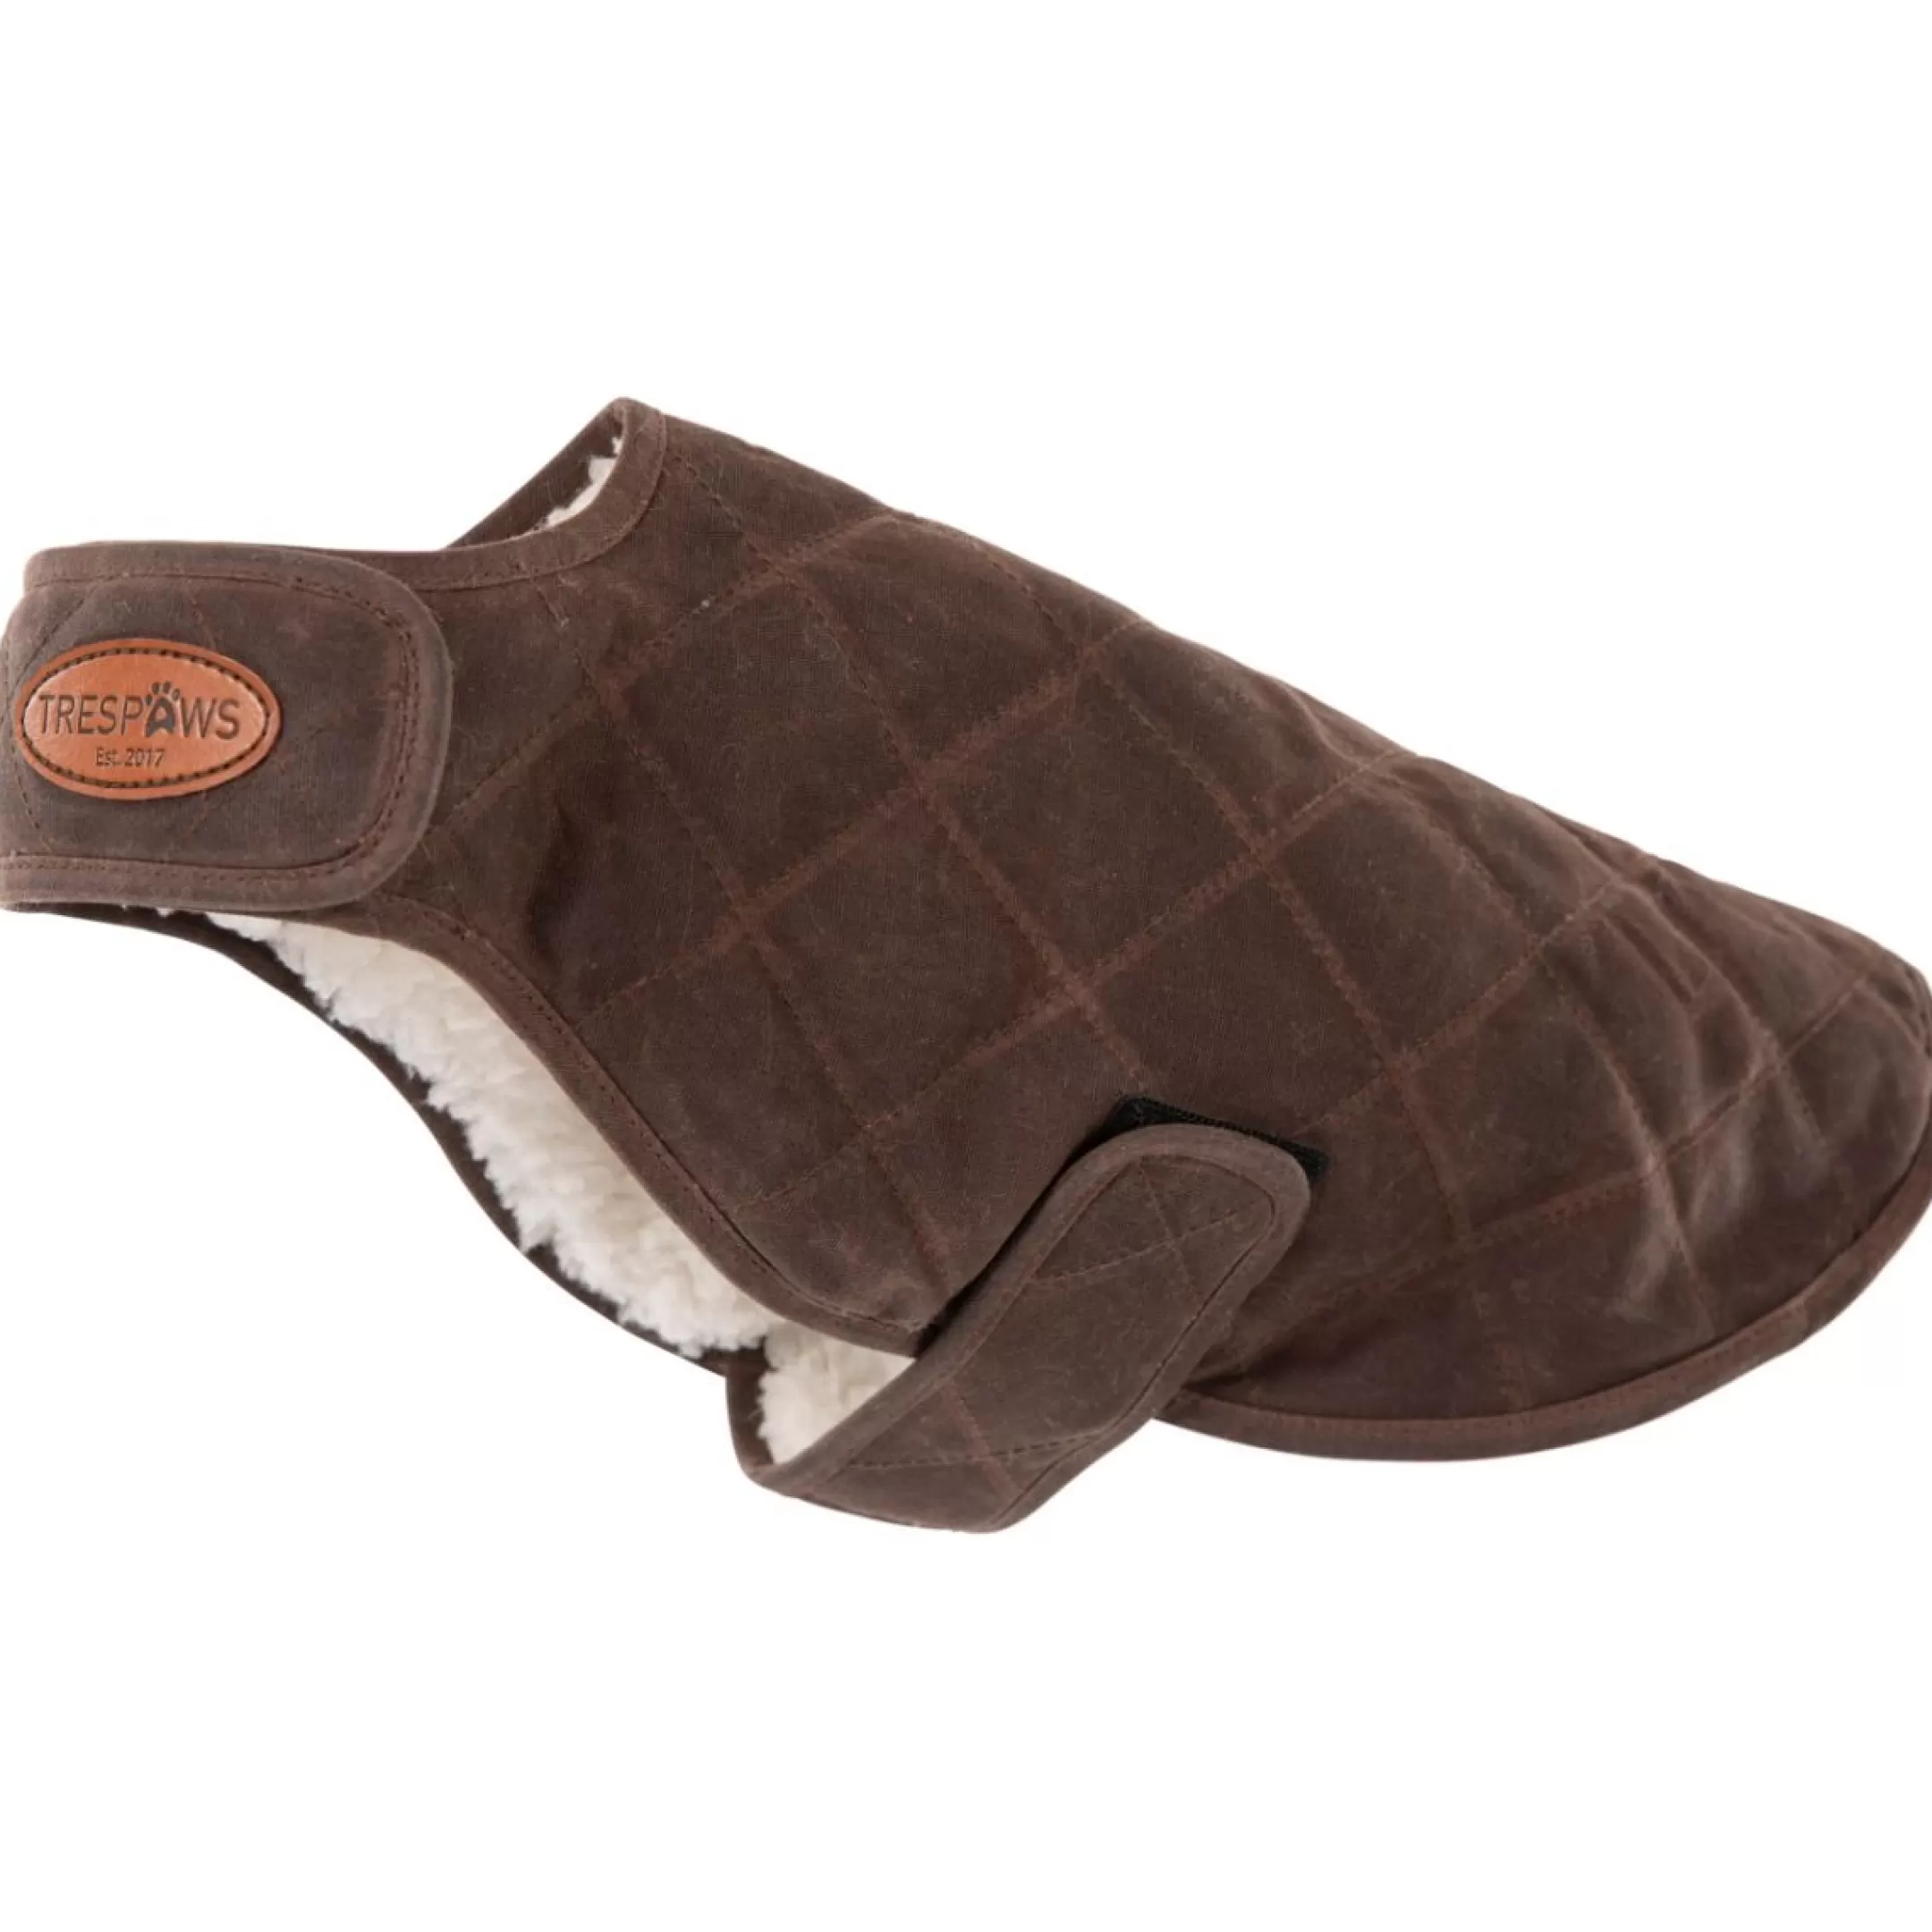 Trespaws Large Quilted Dog Jacket in Bark Artemis | Trespass Cheap